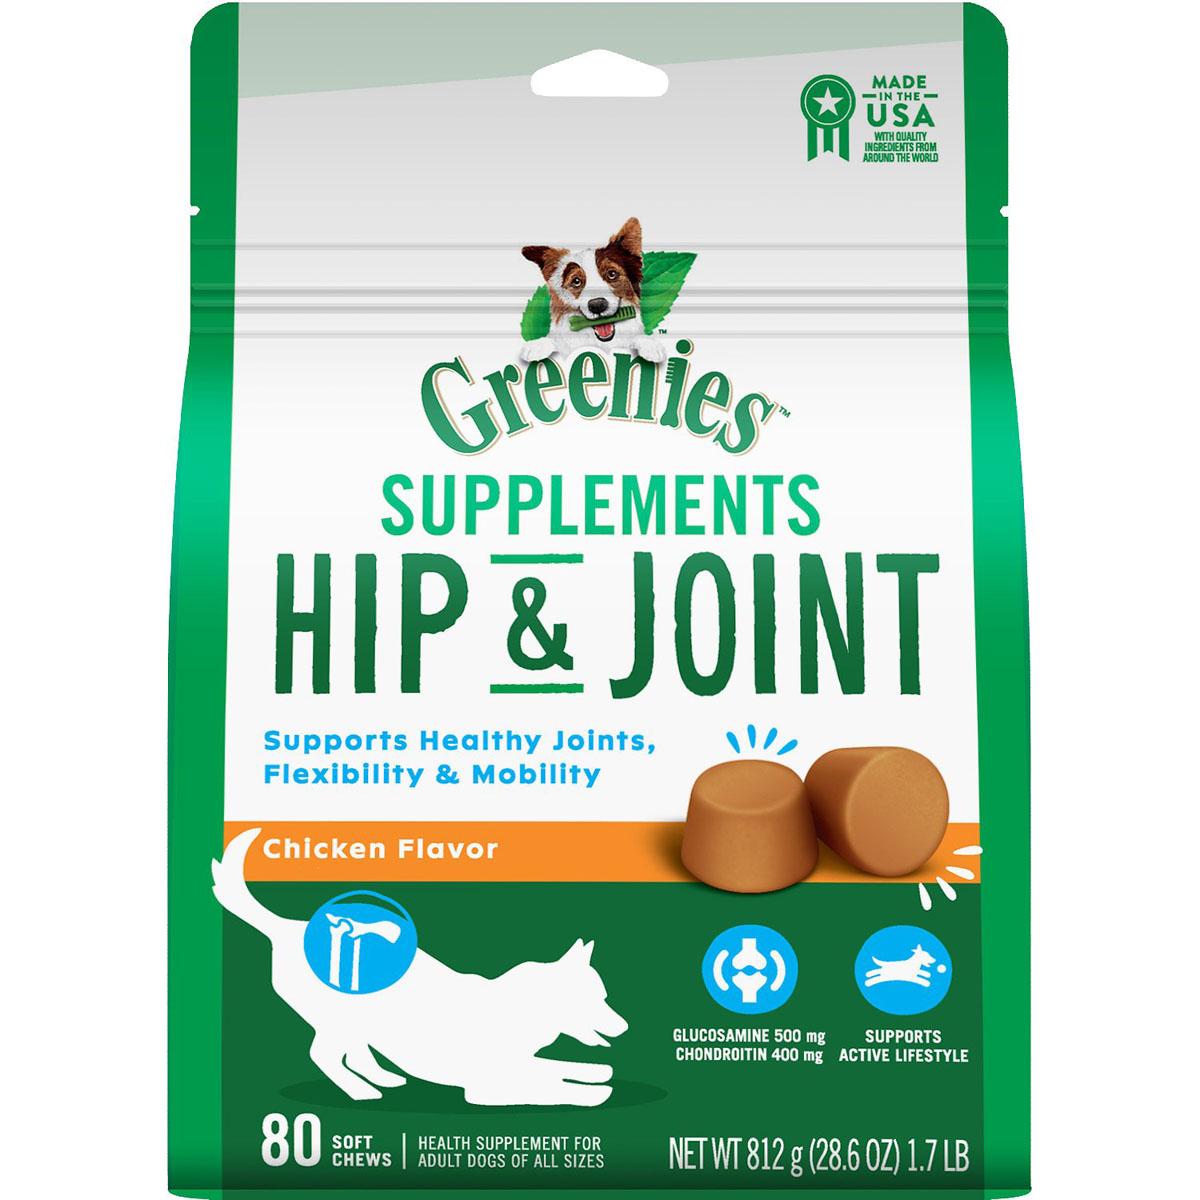 80 Greenies Chicken Flavored Soft Chew Dog Supplements for $4.95 Shipped